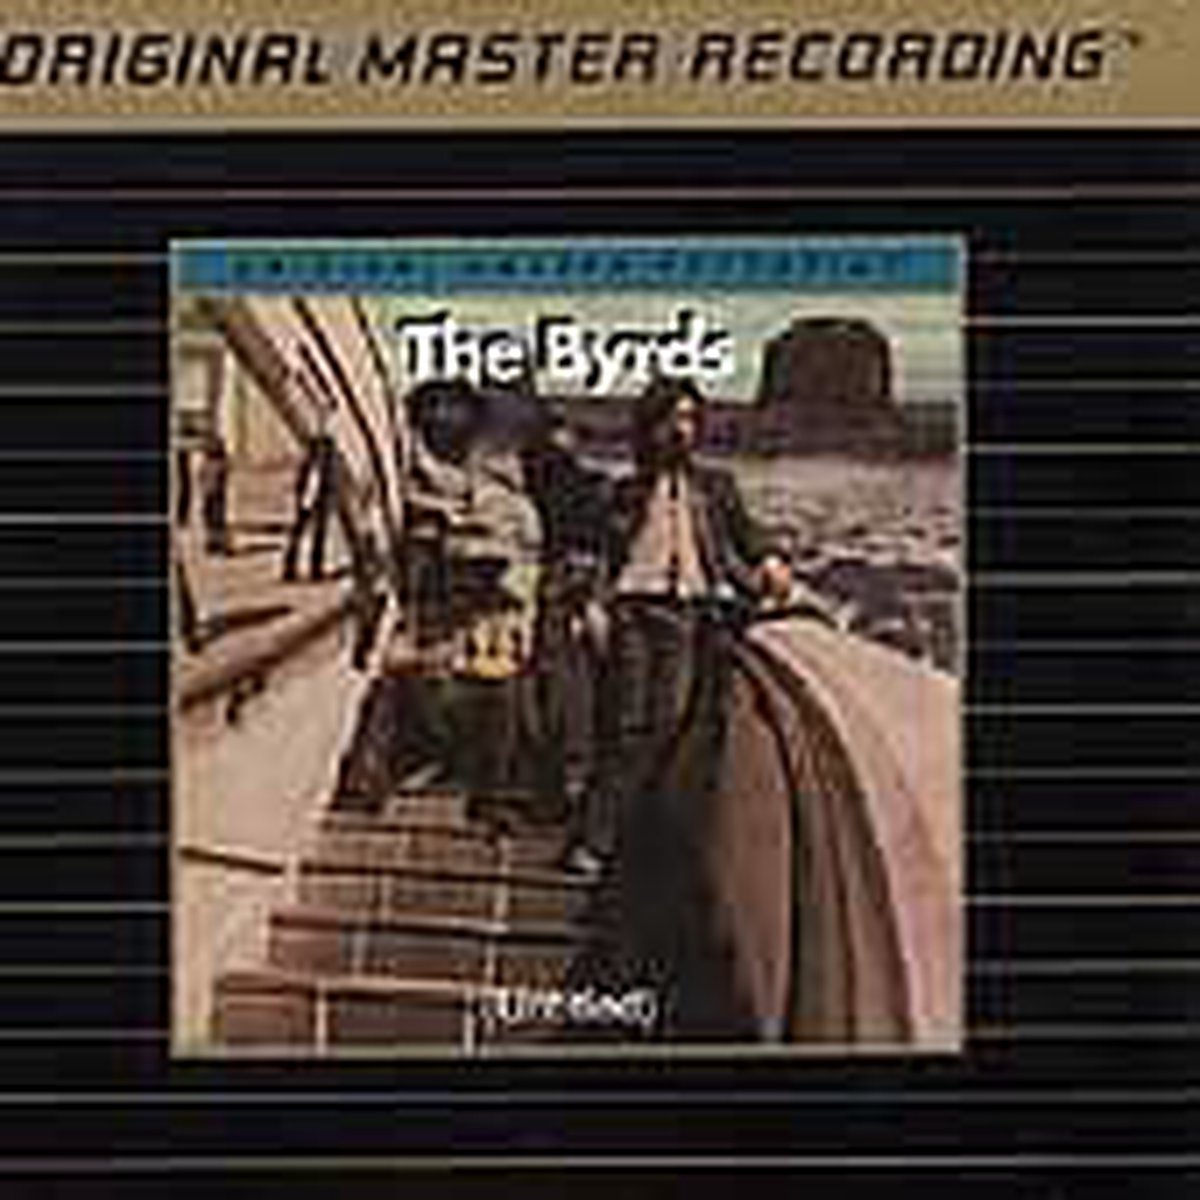 Untitled - The Byrds